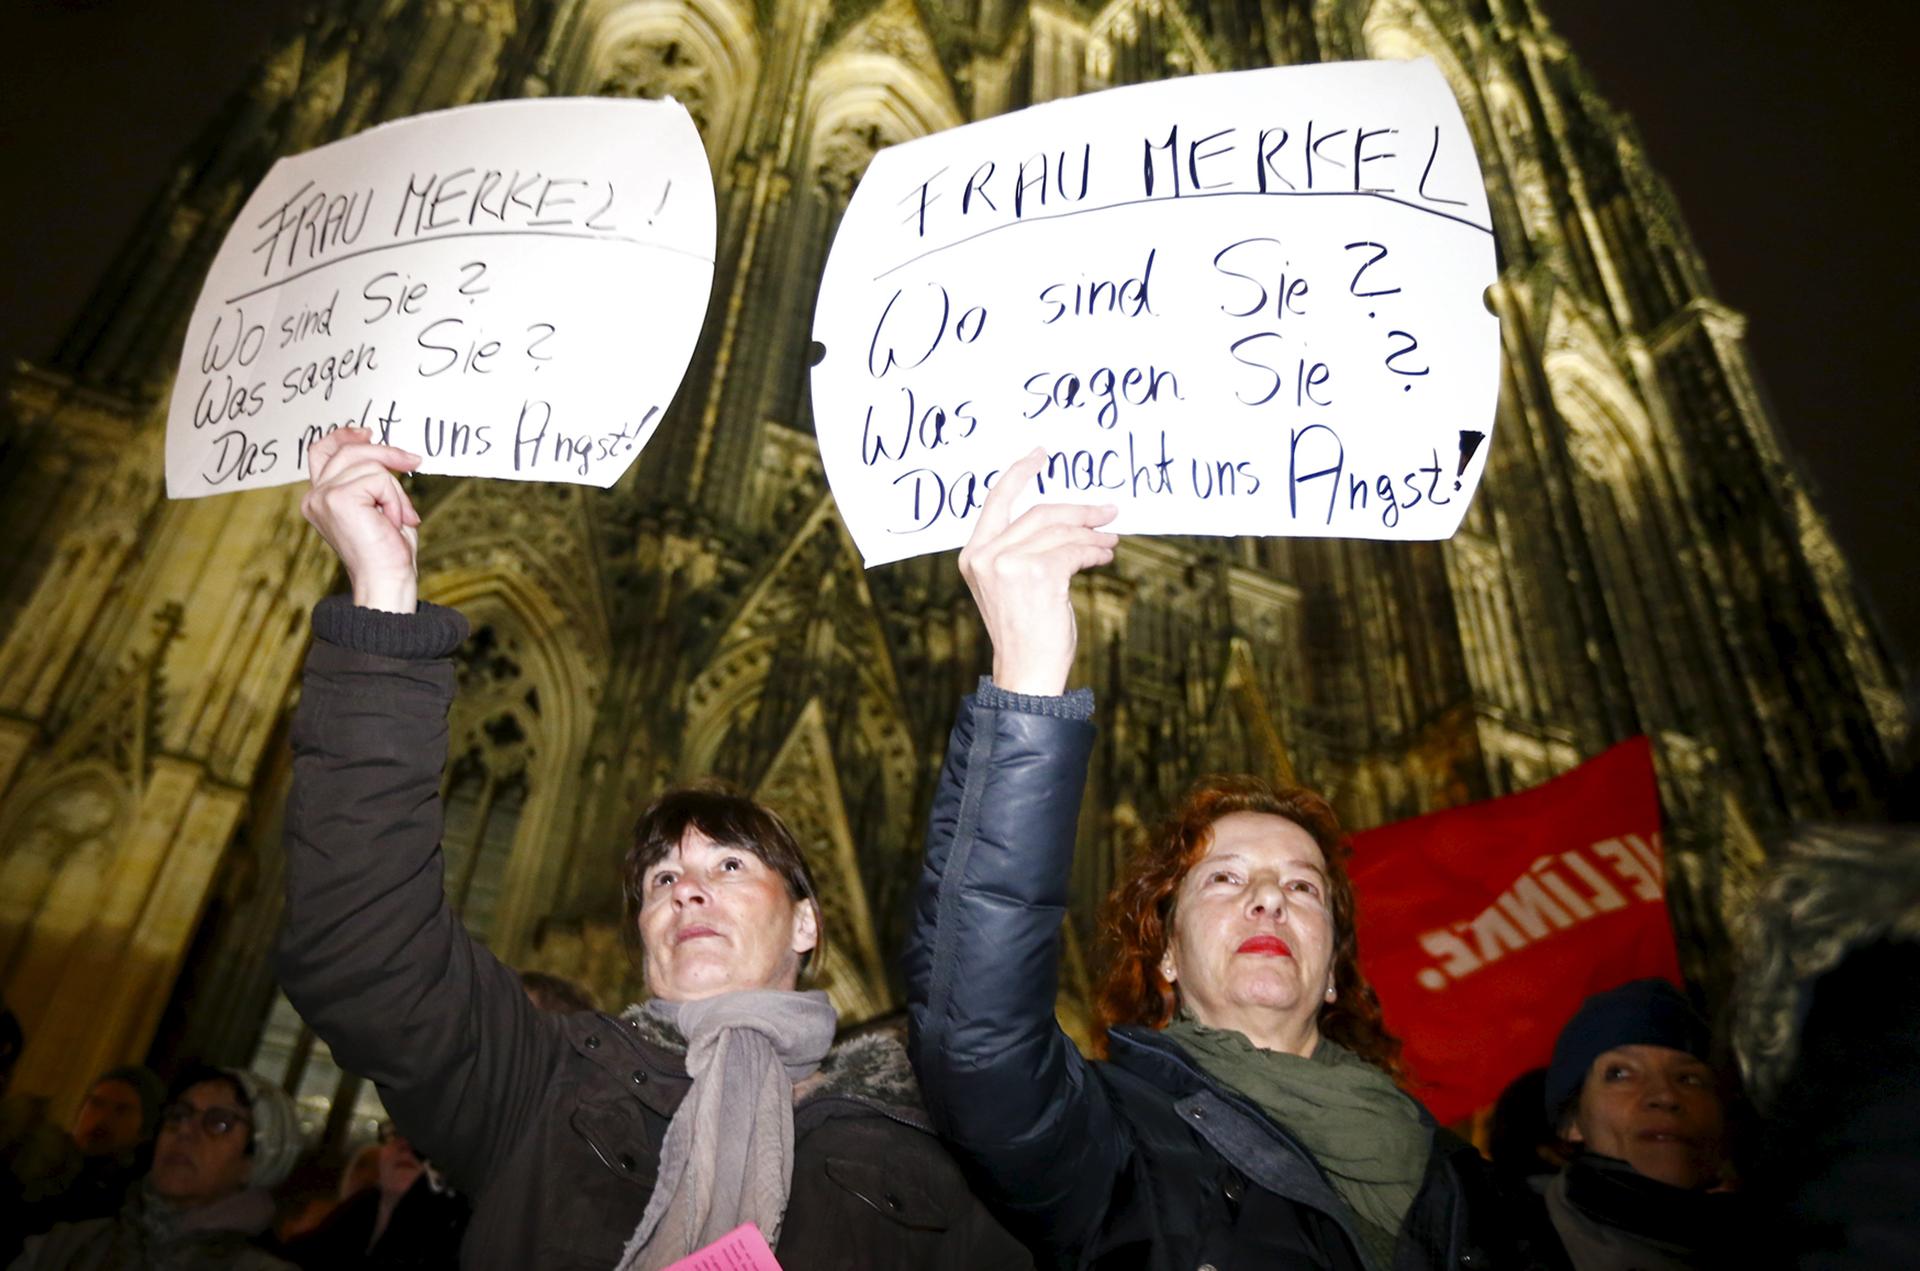 Women hold up placards that read "Mrs. Merkel: Where are you? What are you saying? This worries us!" during a protest in front of the Cologne Cathedral, Germany, January 5, 2016.